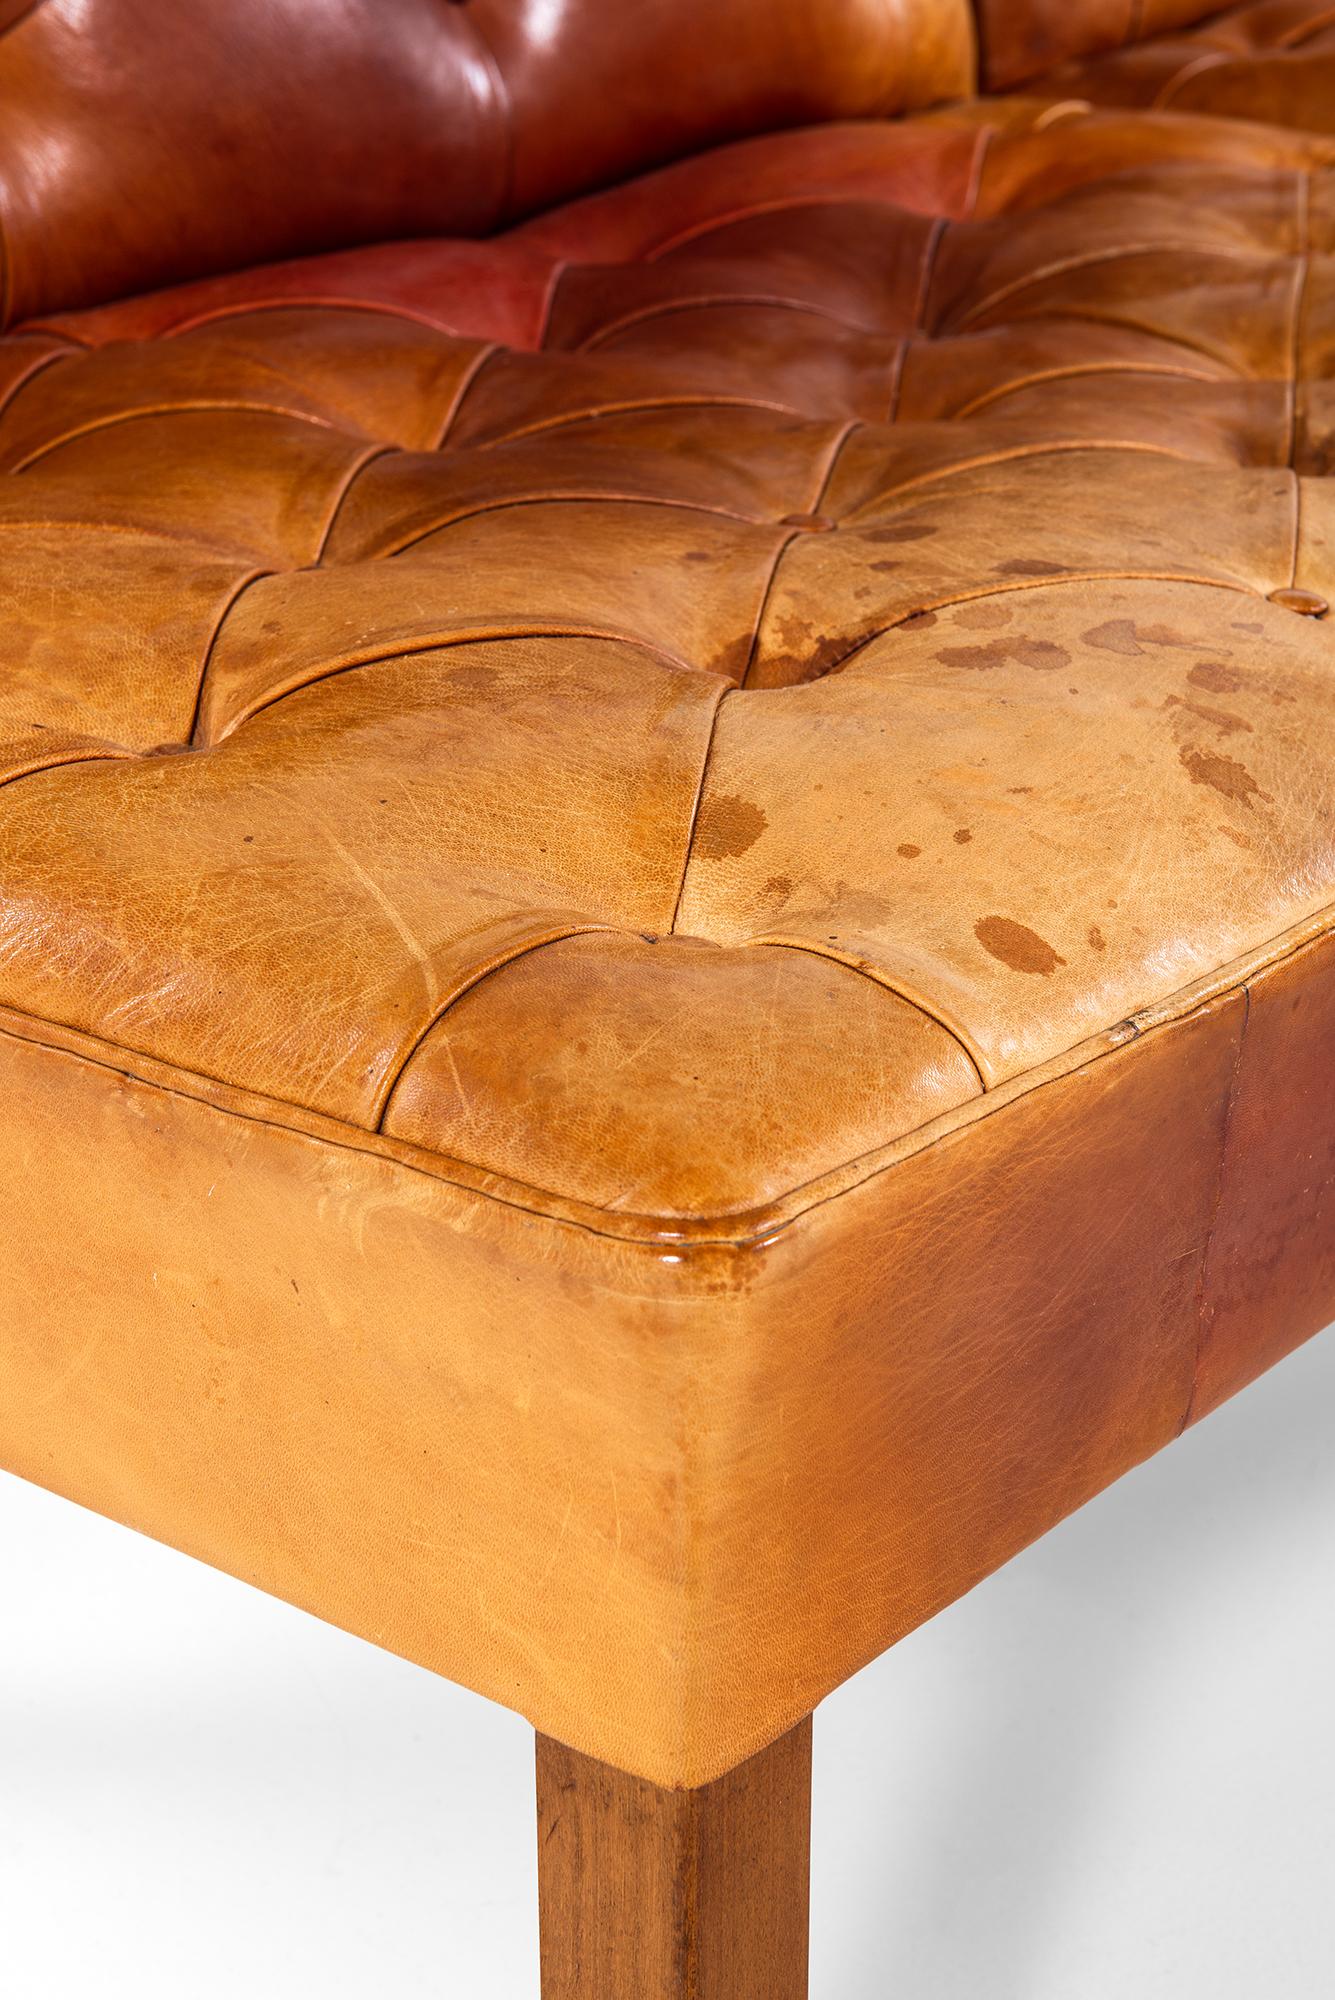 Leather Kaare Klint Addition Sofas and Footstool Model 4698 by Rud Rasmussen in Denmark